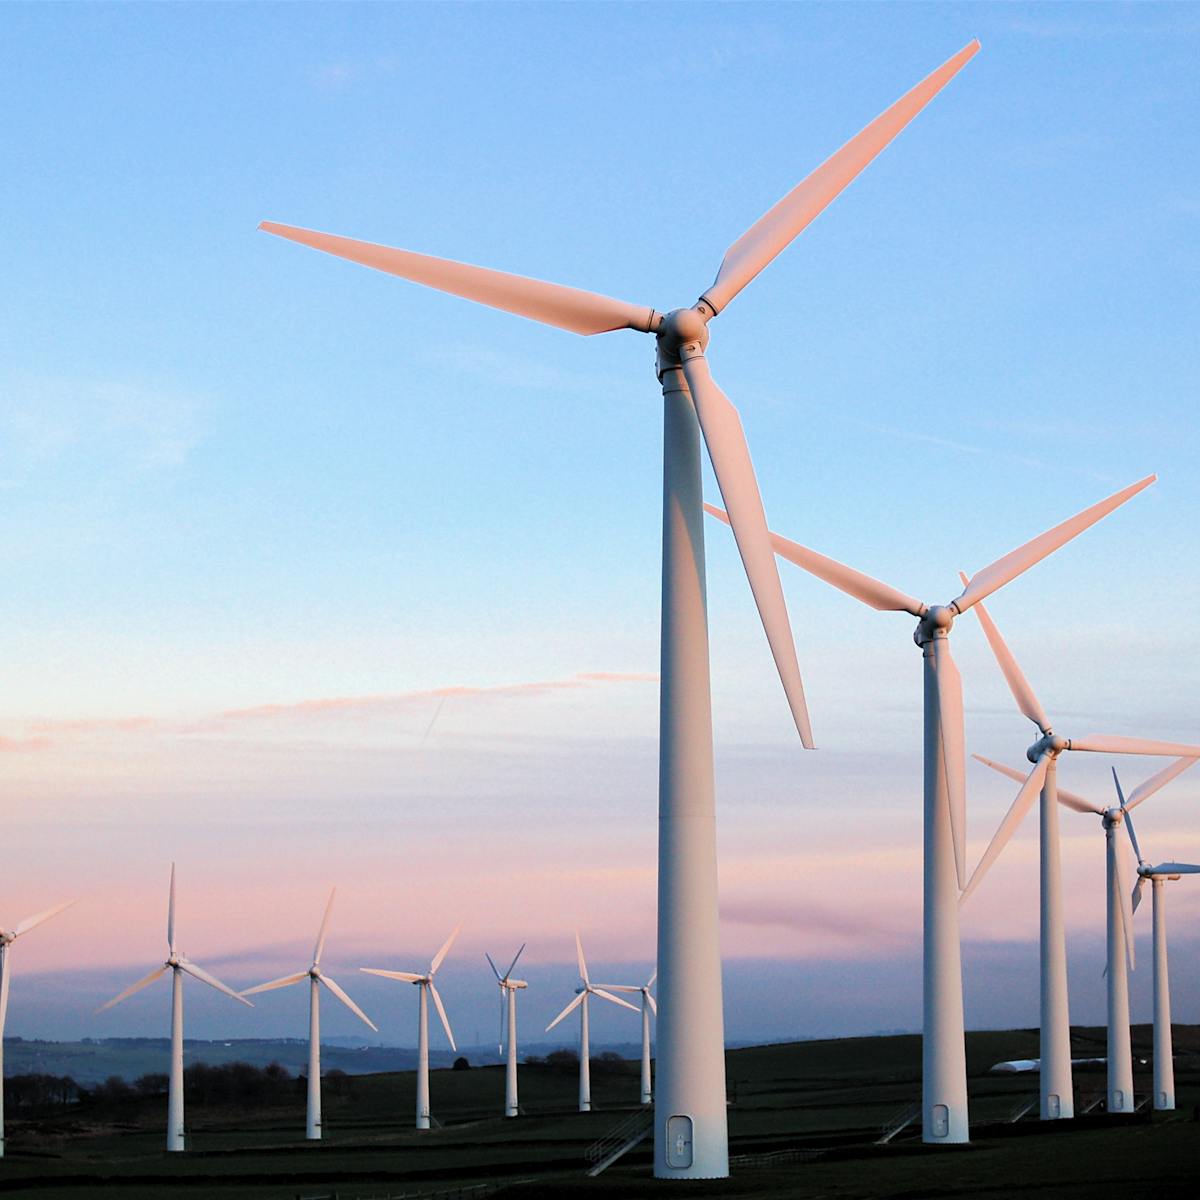 Wind power affects climate – cooling and warming regions around farms,  studies claim